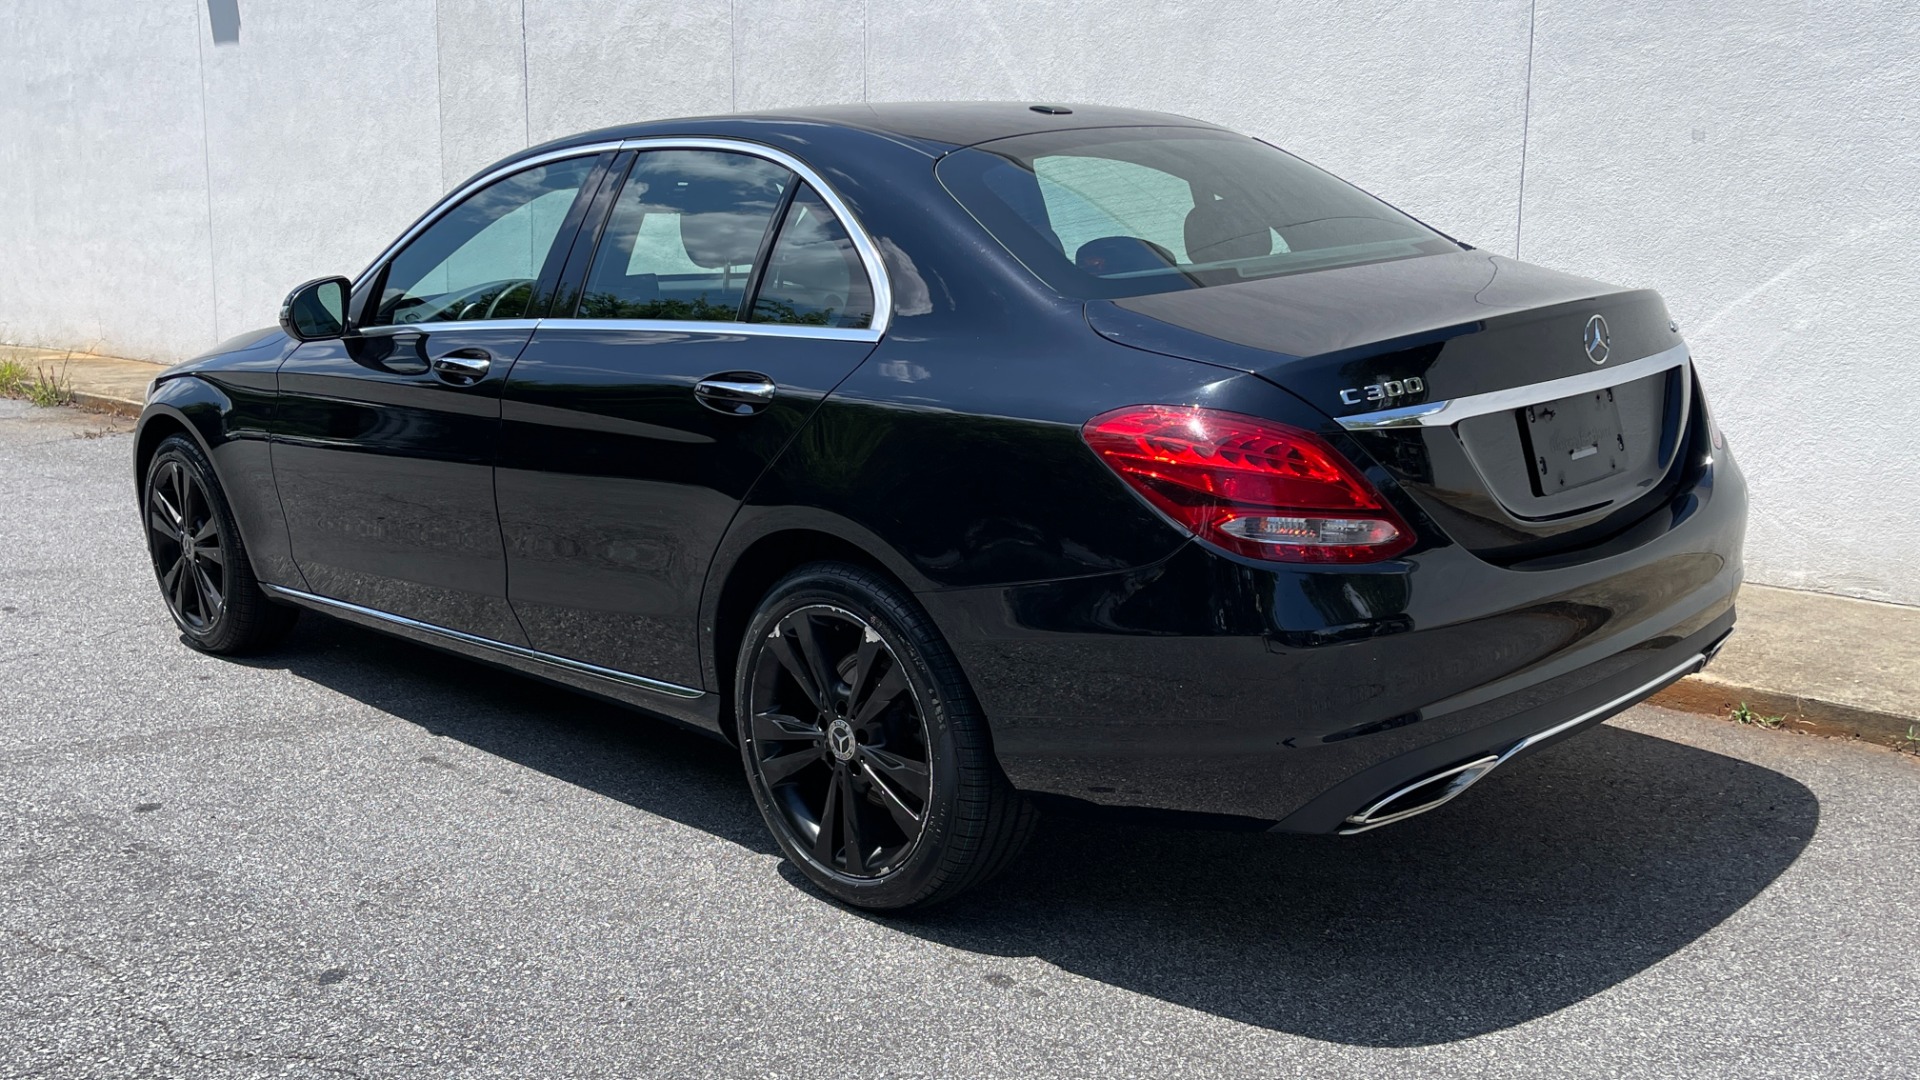 Used 2018 Mercedes-Benz C-Class C 300 / PREMIUM / REVIEW CAM / HTD SEATS / 18IN WHEELS for sale $31,295 at Formula Imports in Charlotte NC 28227 6